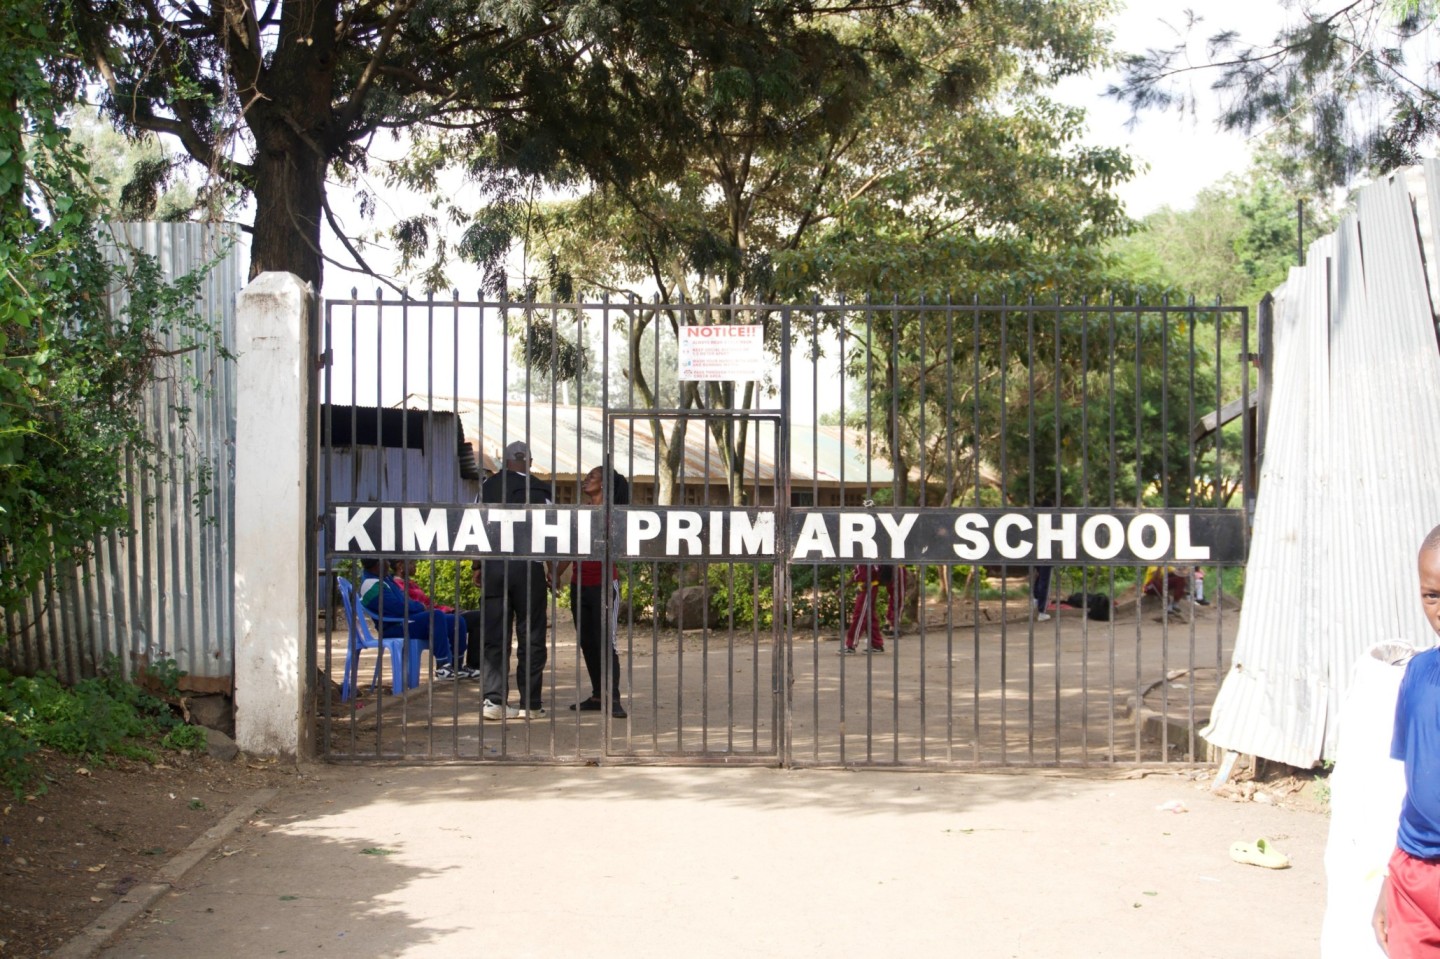 How Kimathi Primary School uses karate to build discipline and character